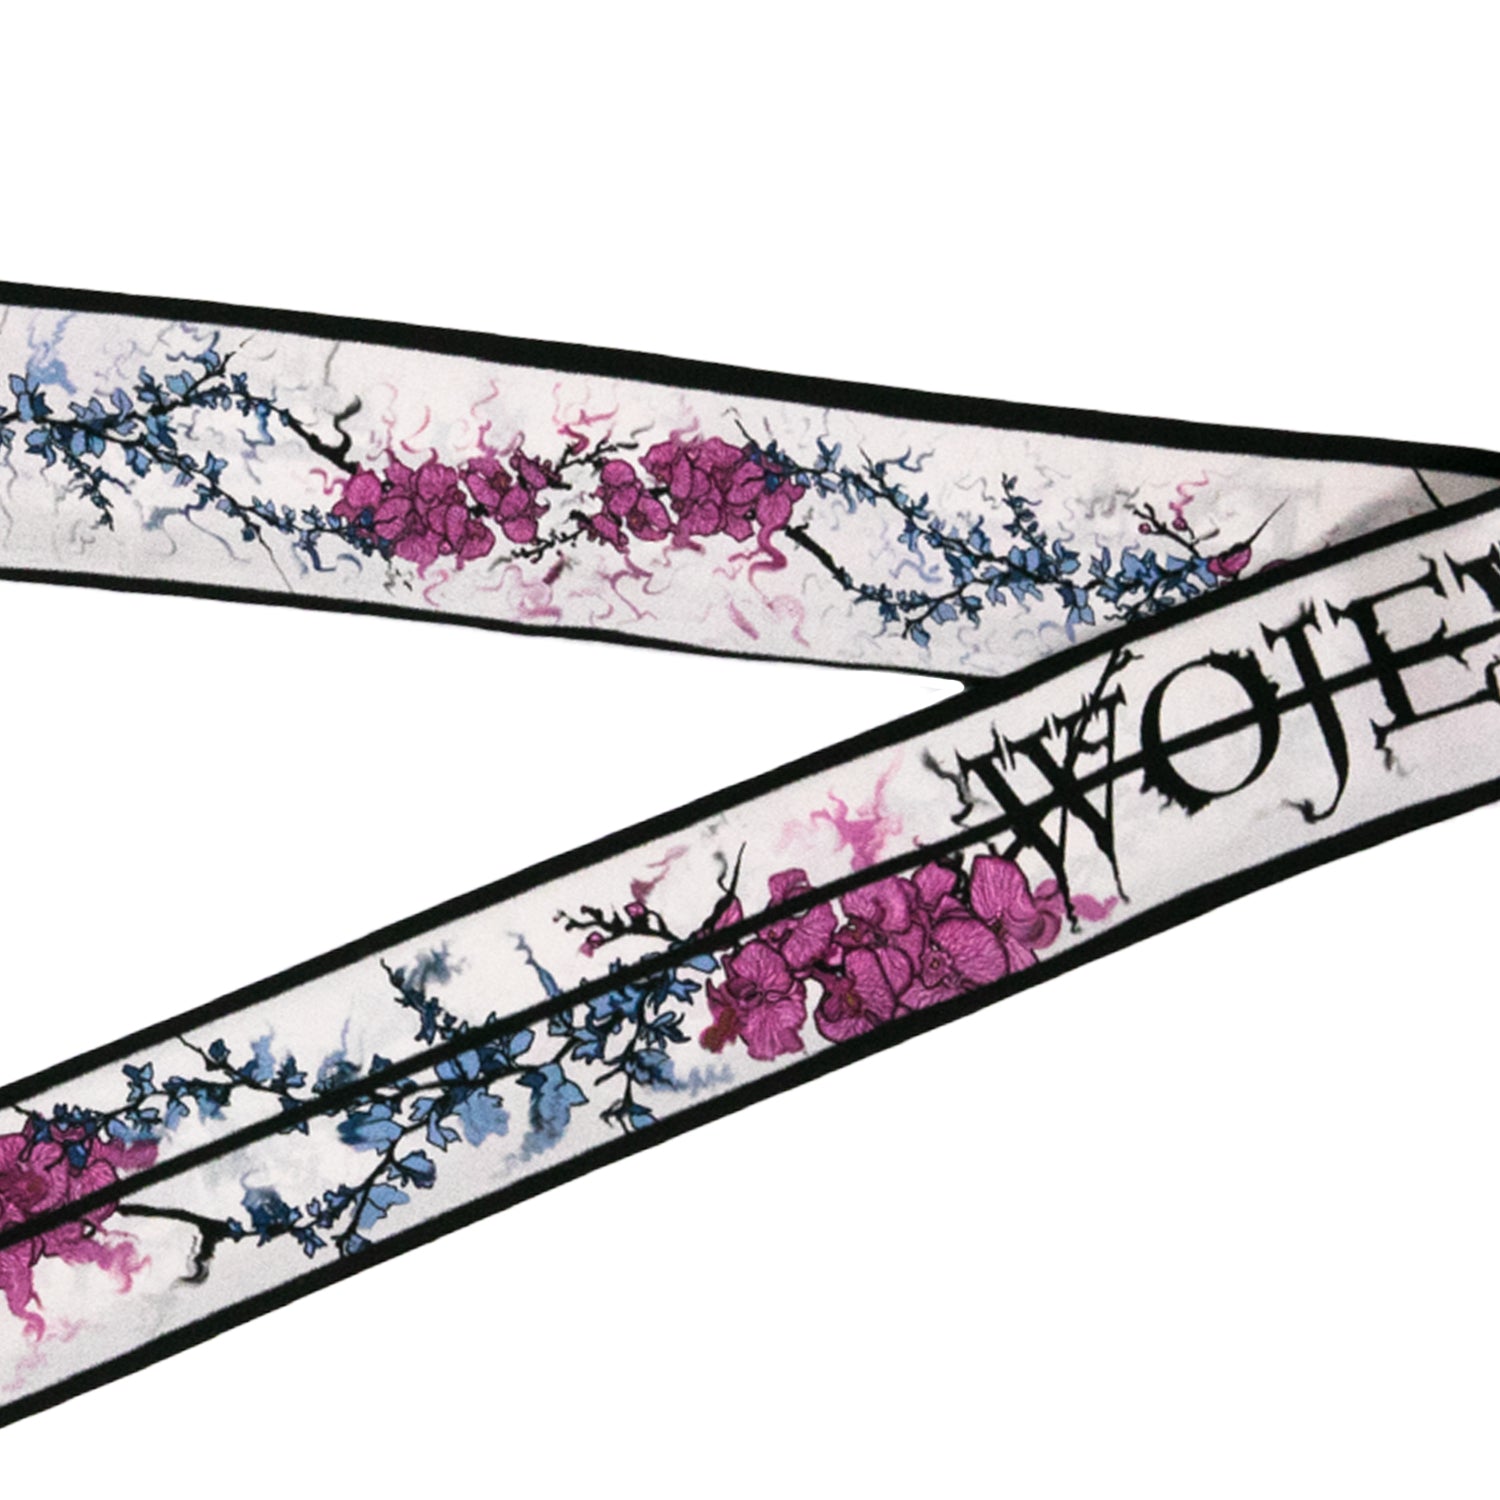 The Voyager Twilly Scarf